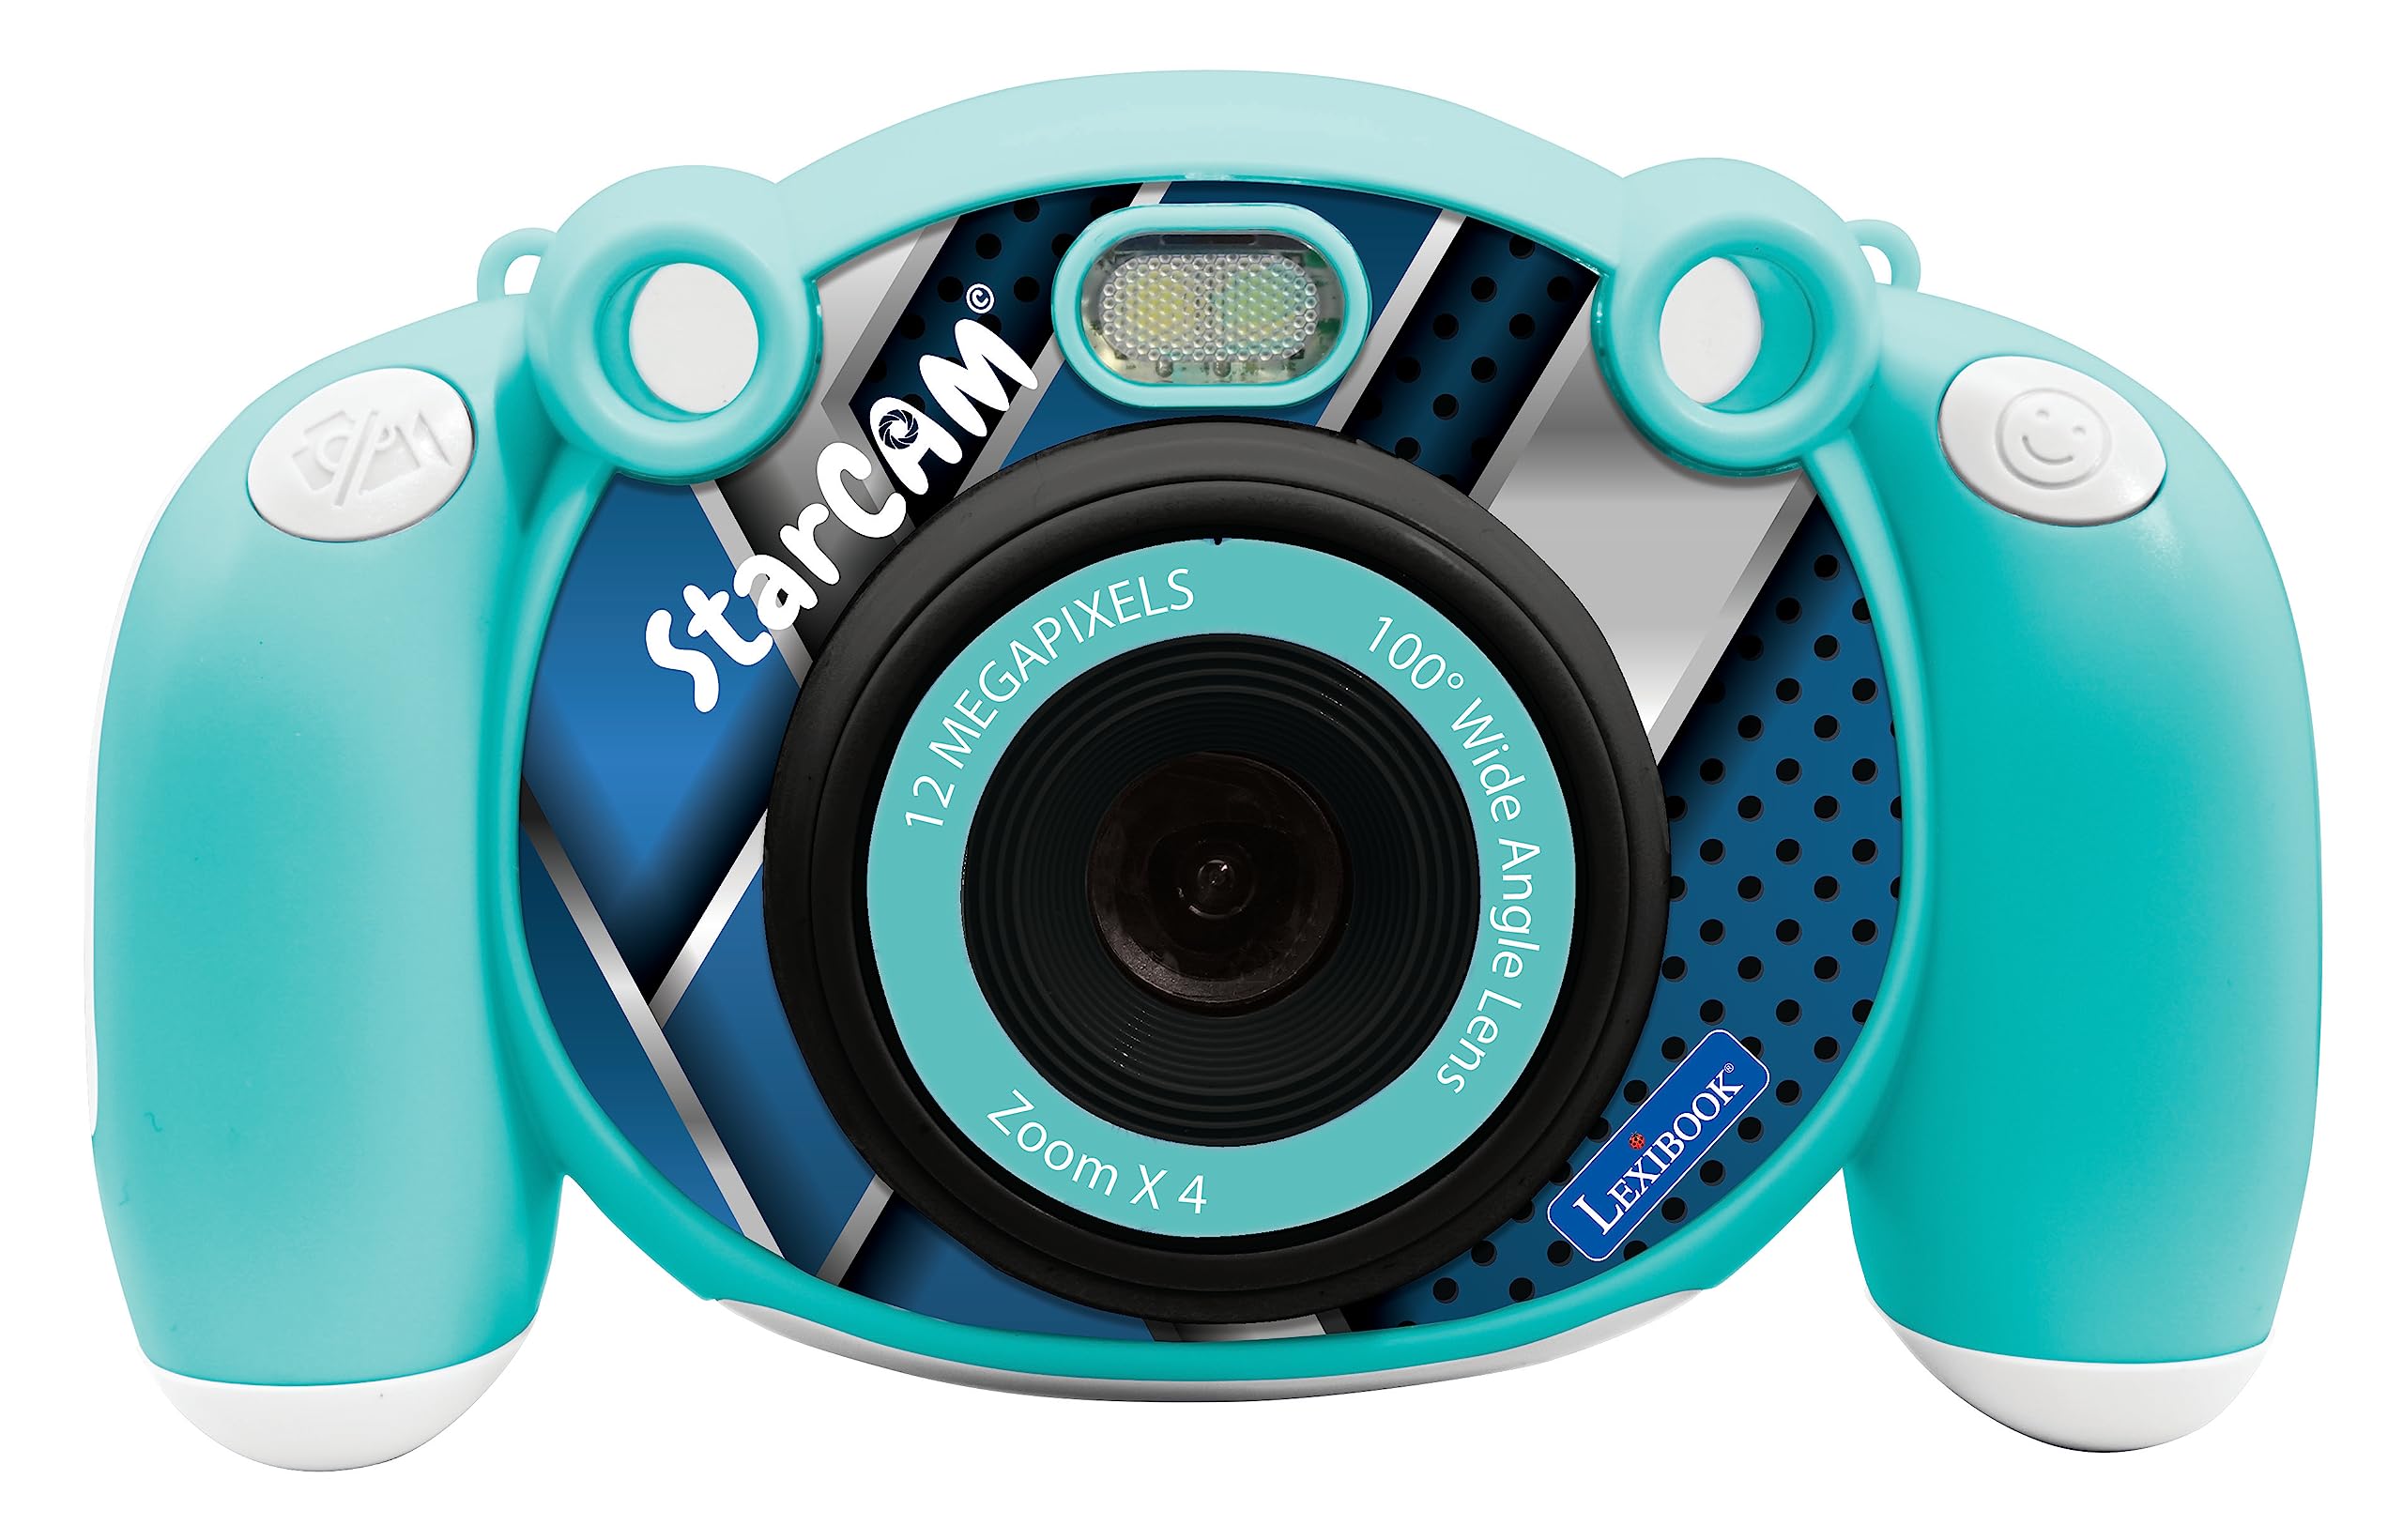 Lexibook - 4-in-1 Kids Camera with Photo, Video, Audio and Game Functions - DJ080